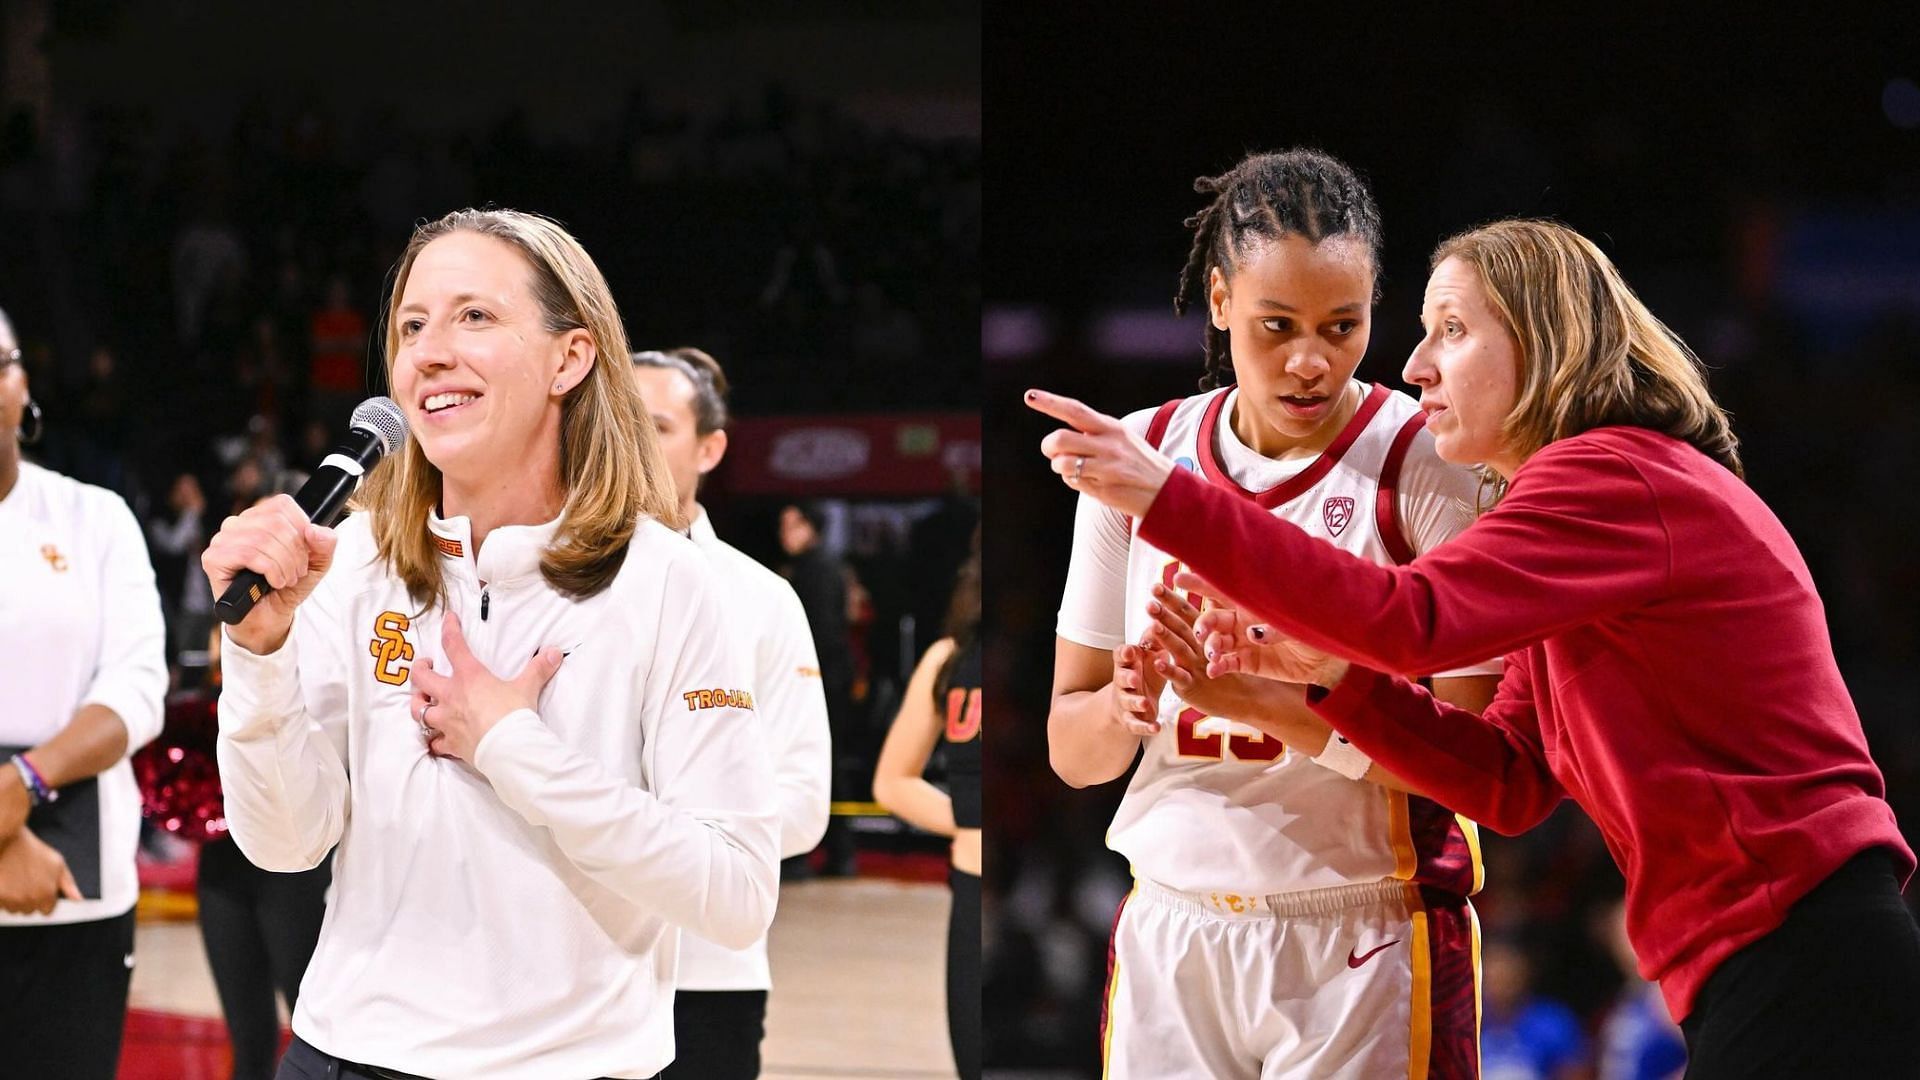 Lindsay Gottlieb extends conract with USC